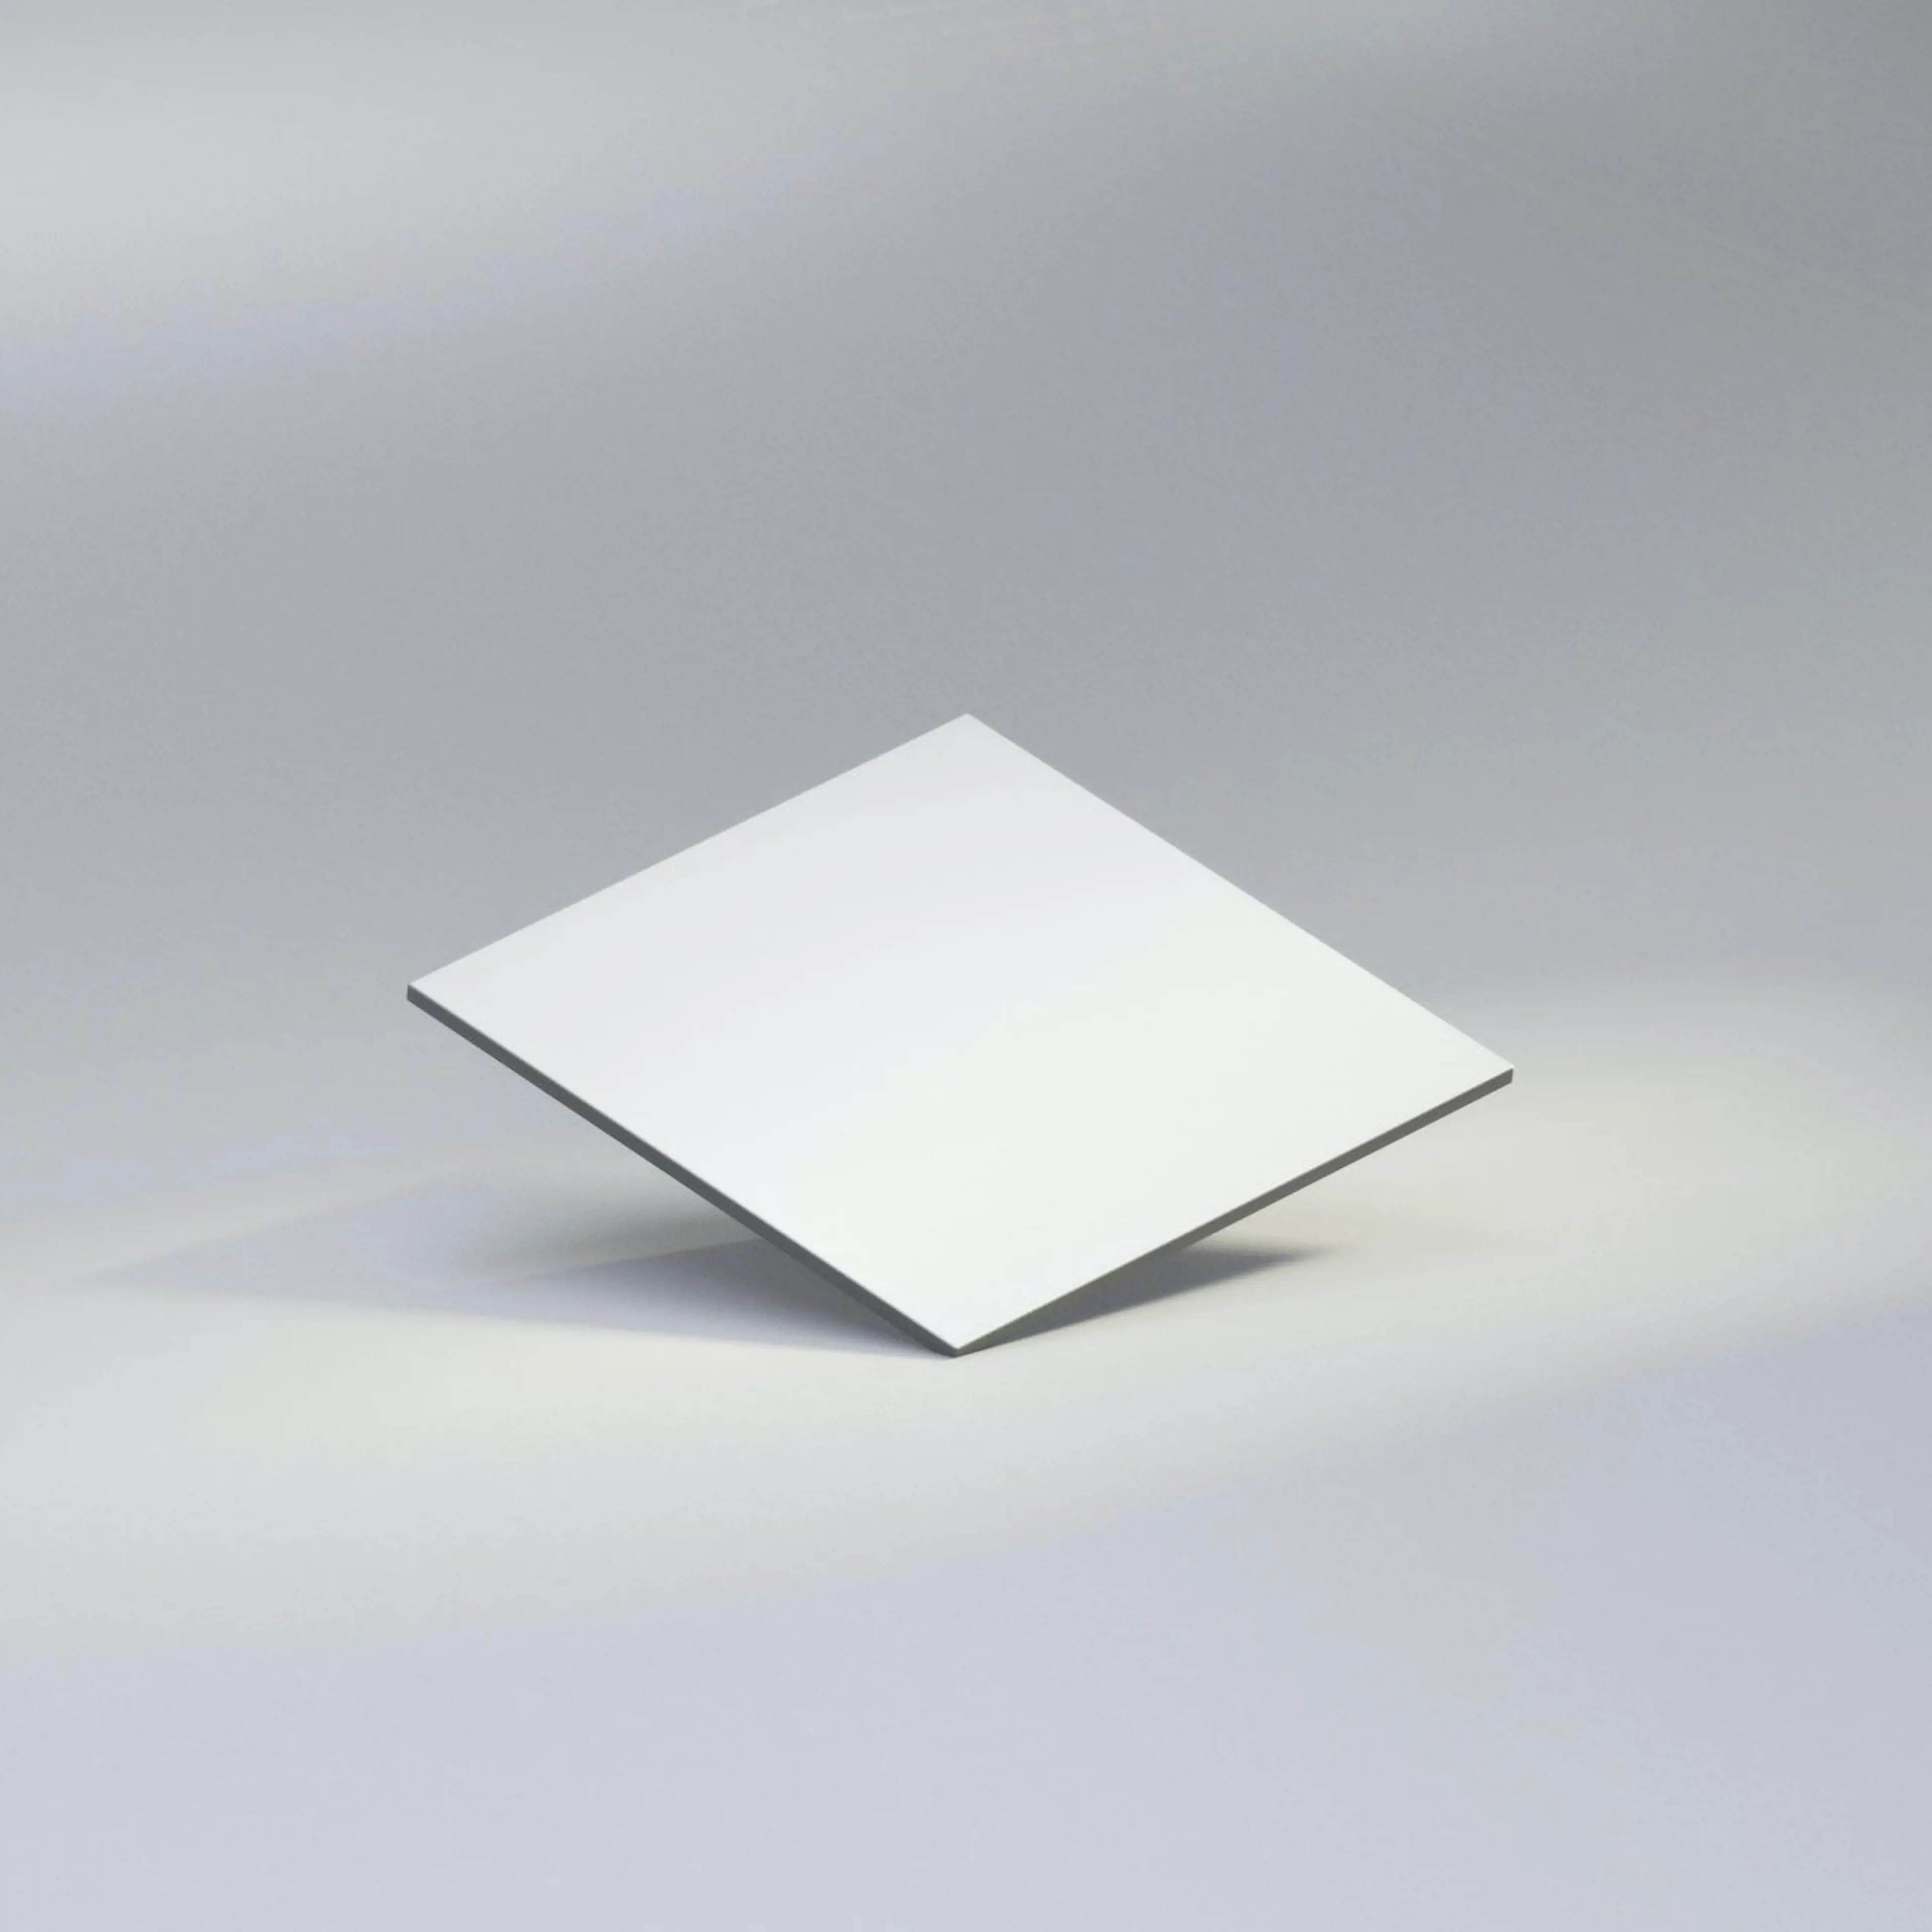 White square floating on grey surface